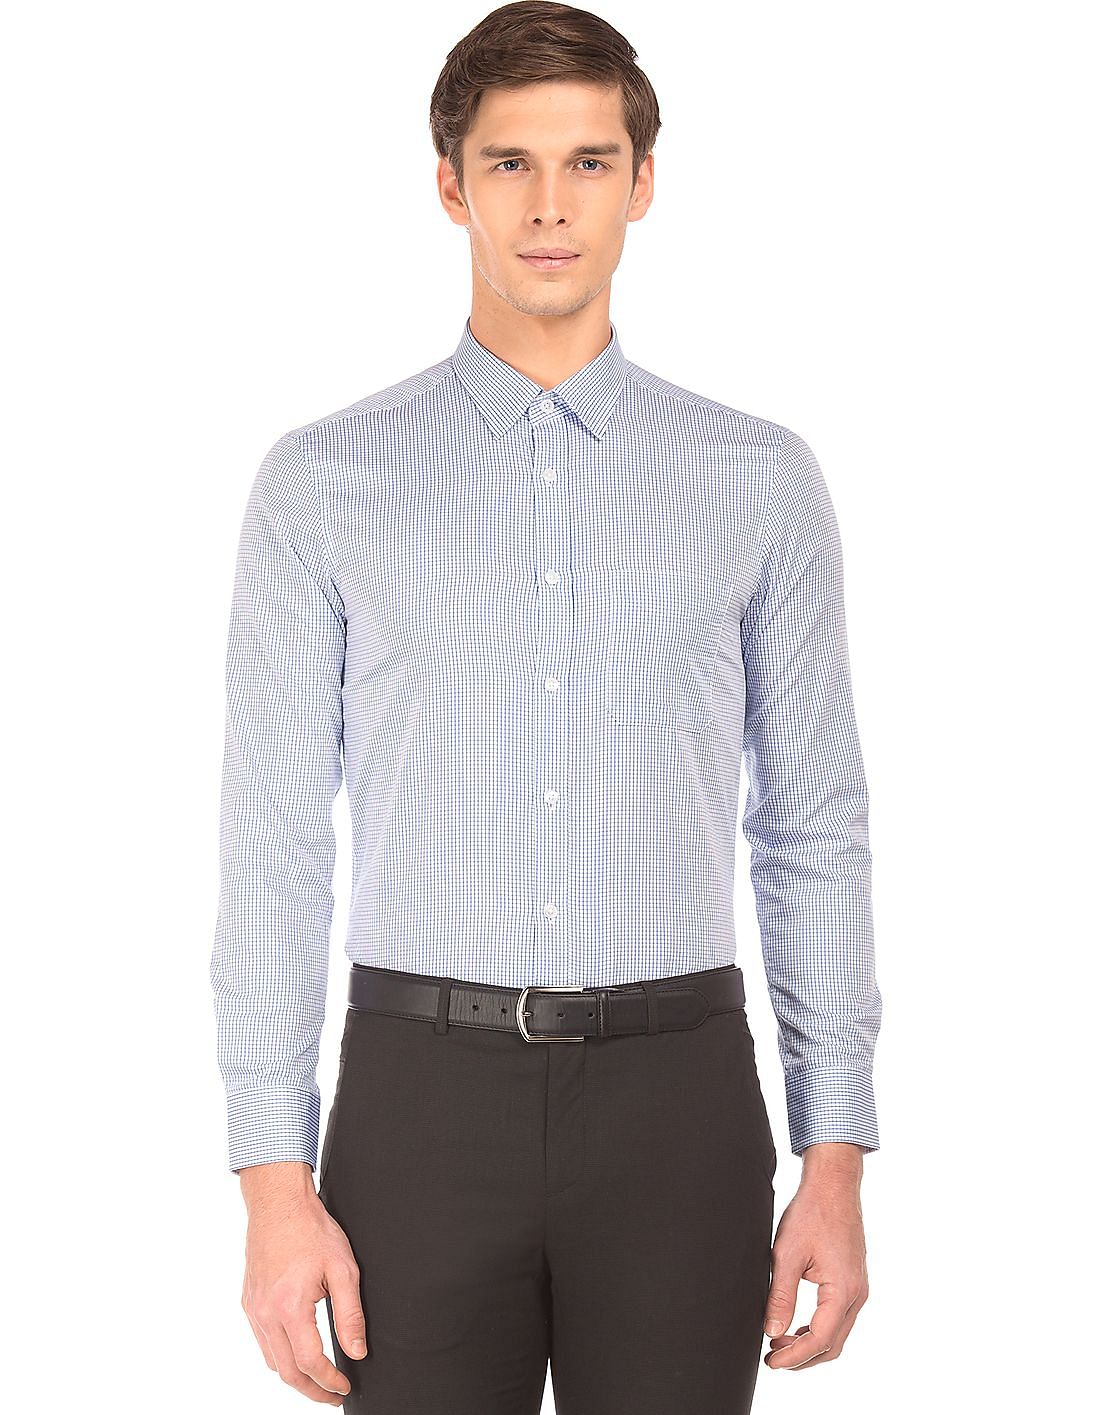 Buy USPA Tailored Tailored Fit Check Shirt - NNNOW.com